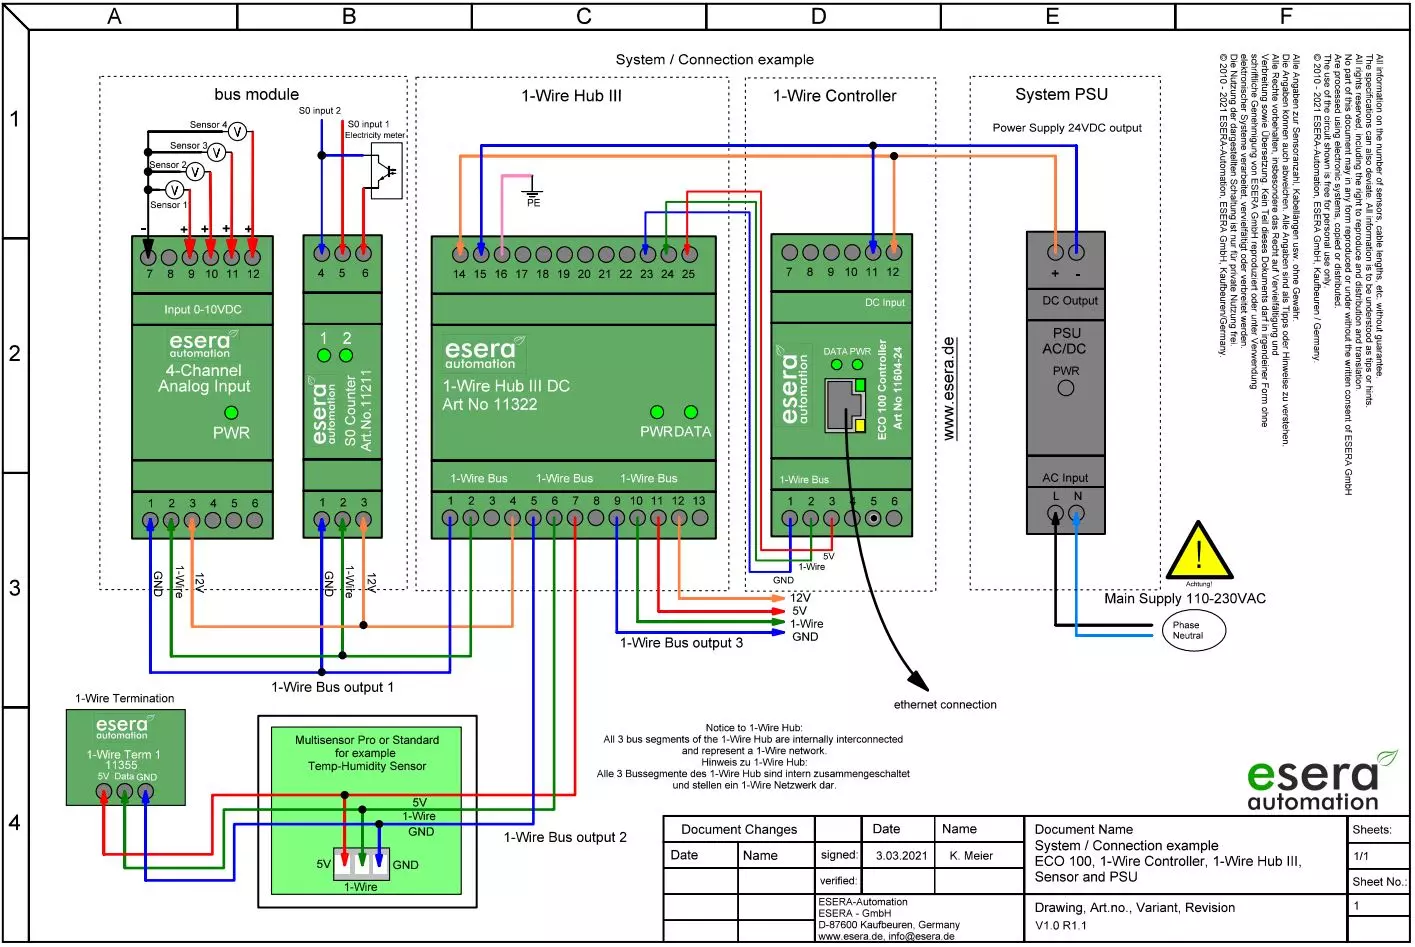 1-Wire Controller 1, intelligent system interface